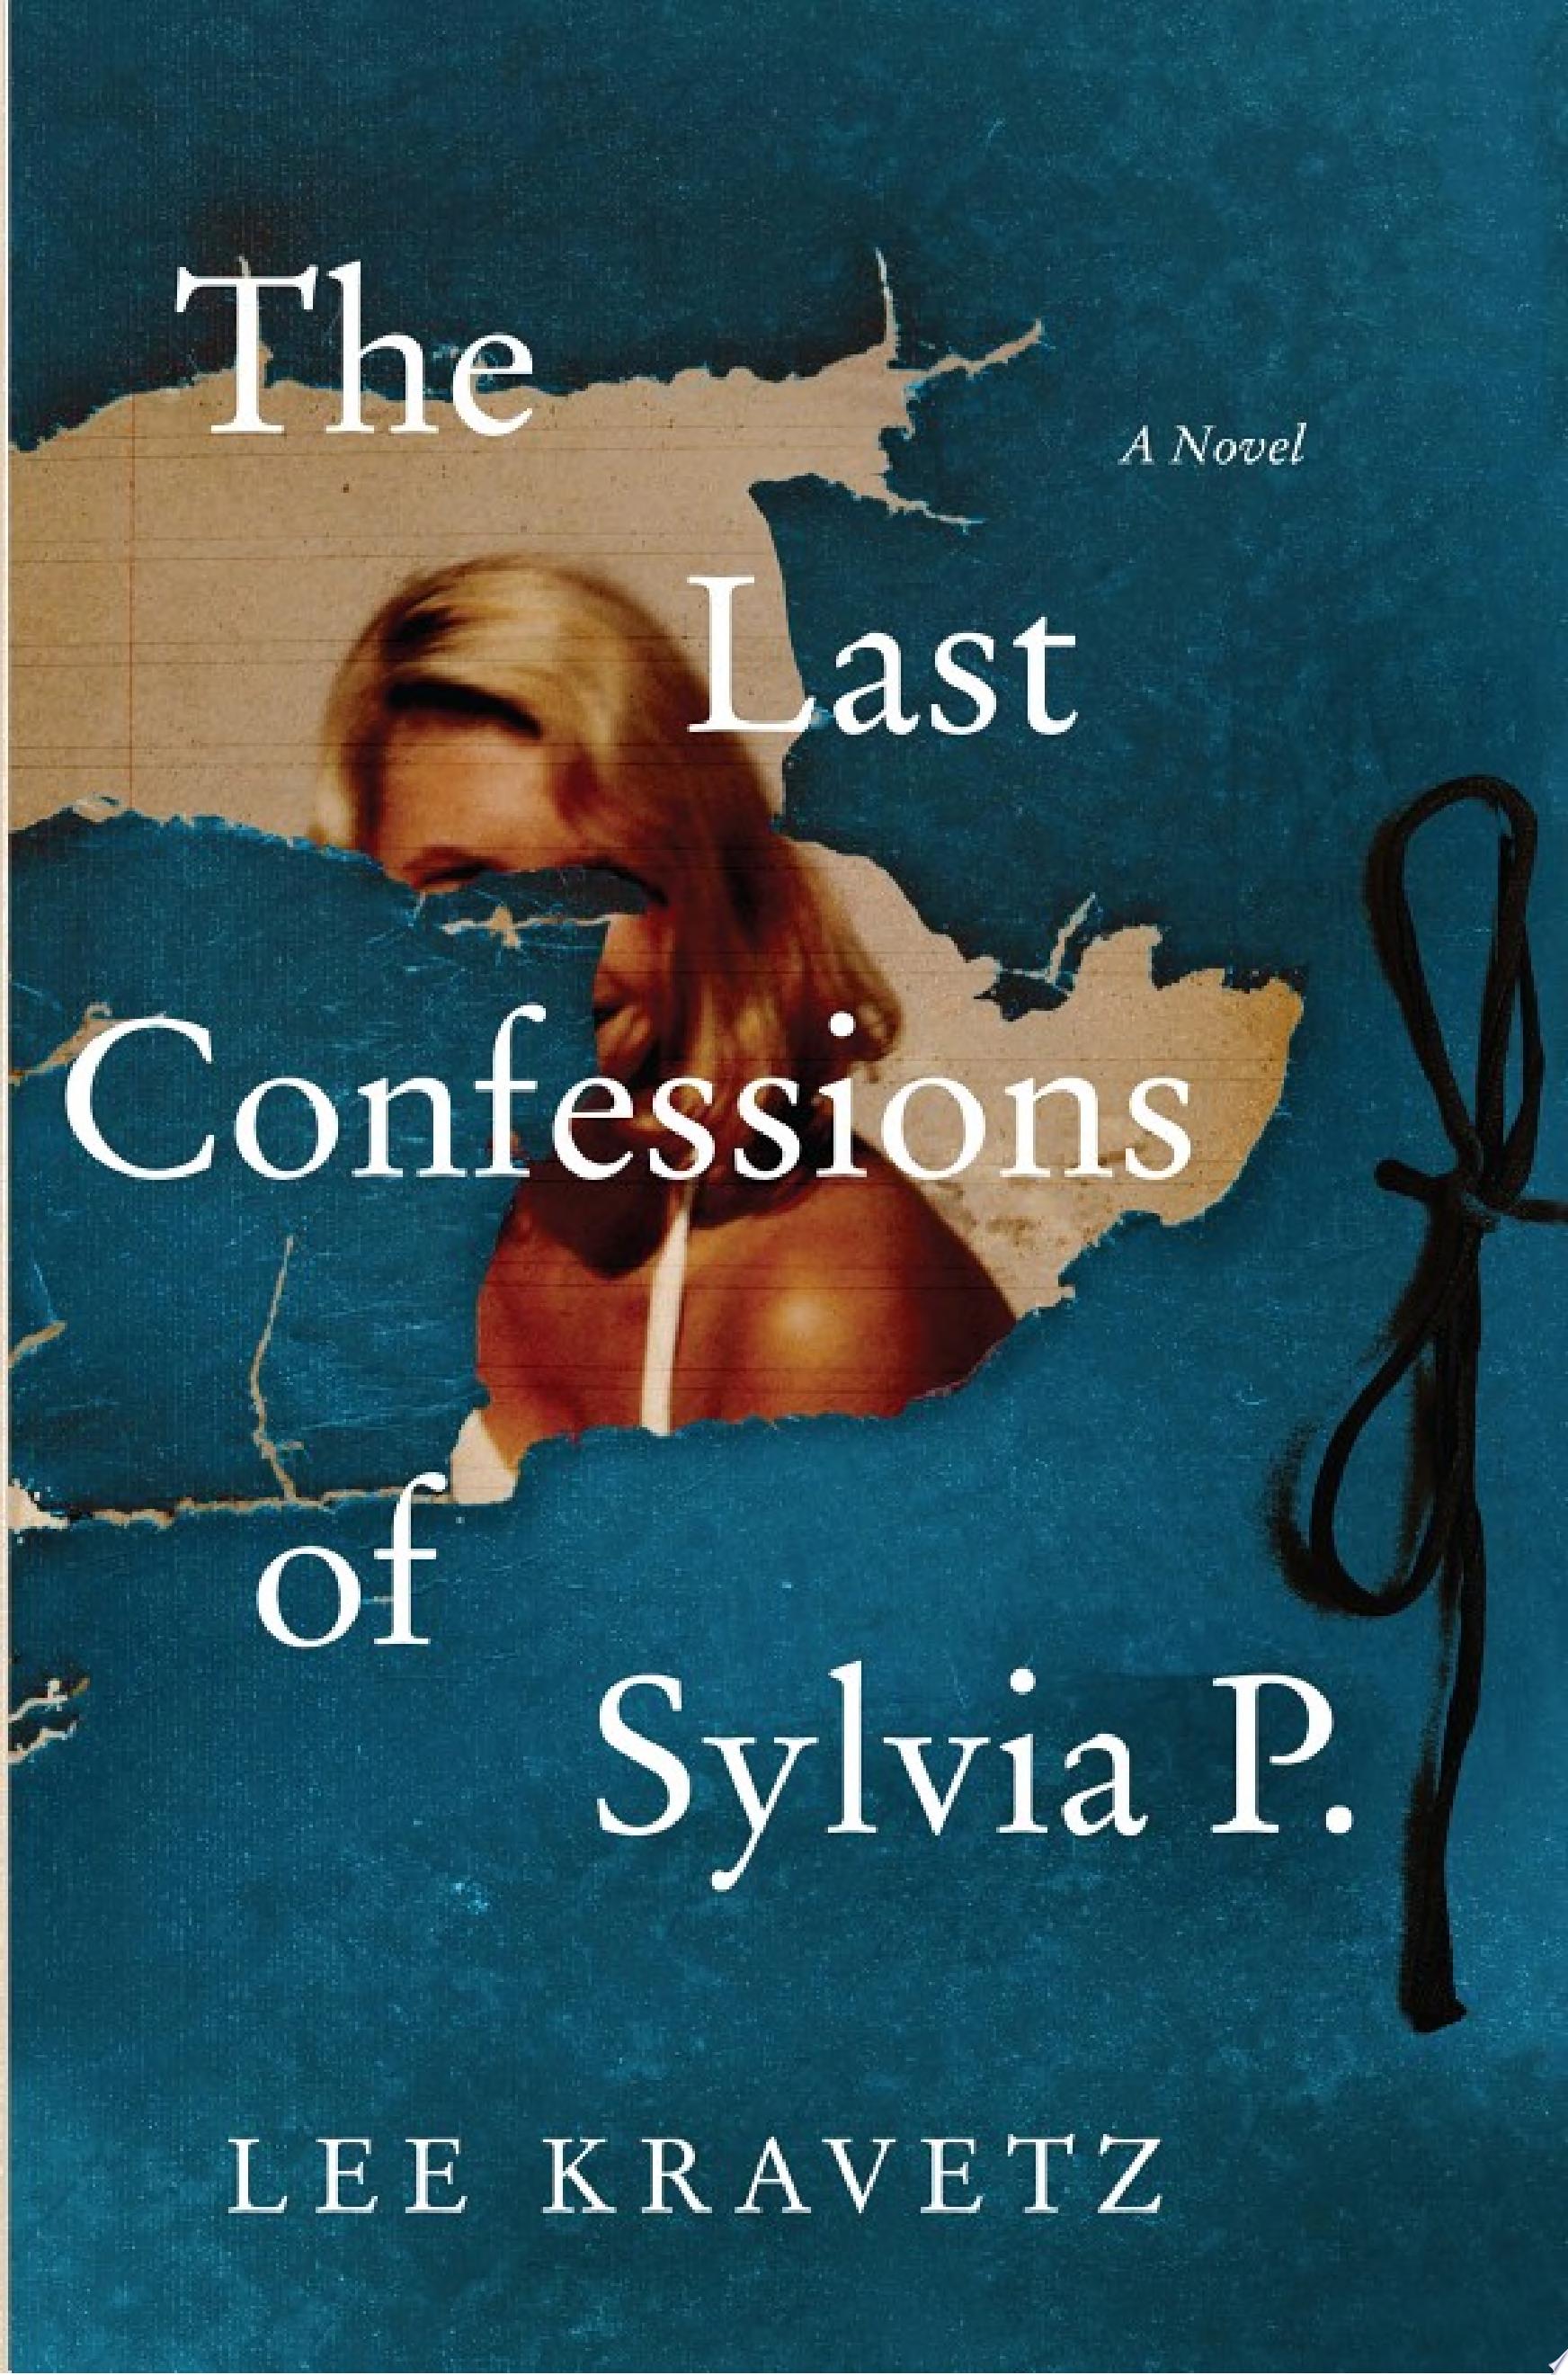 Image for "The Last Confessions of Sylvia P."